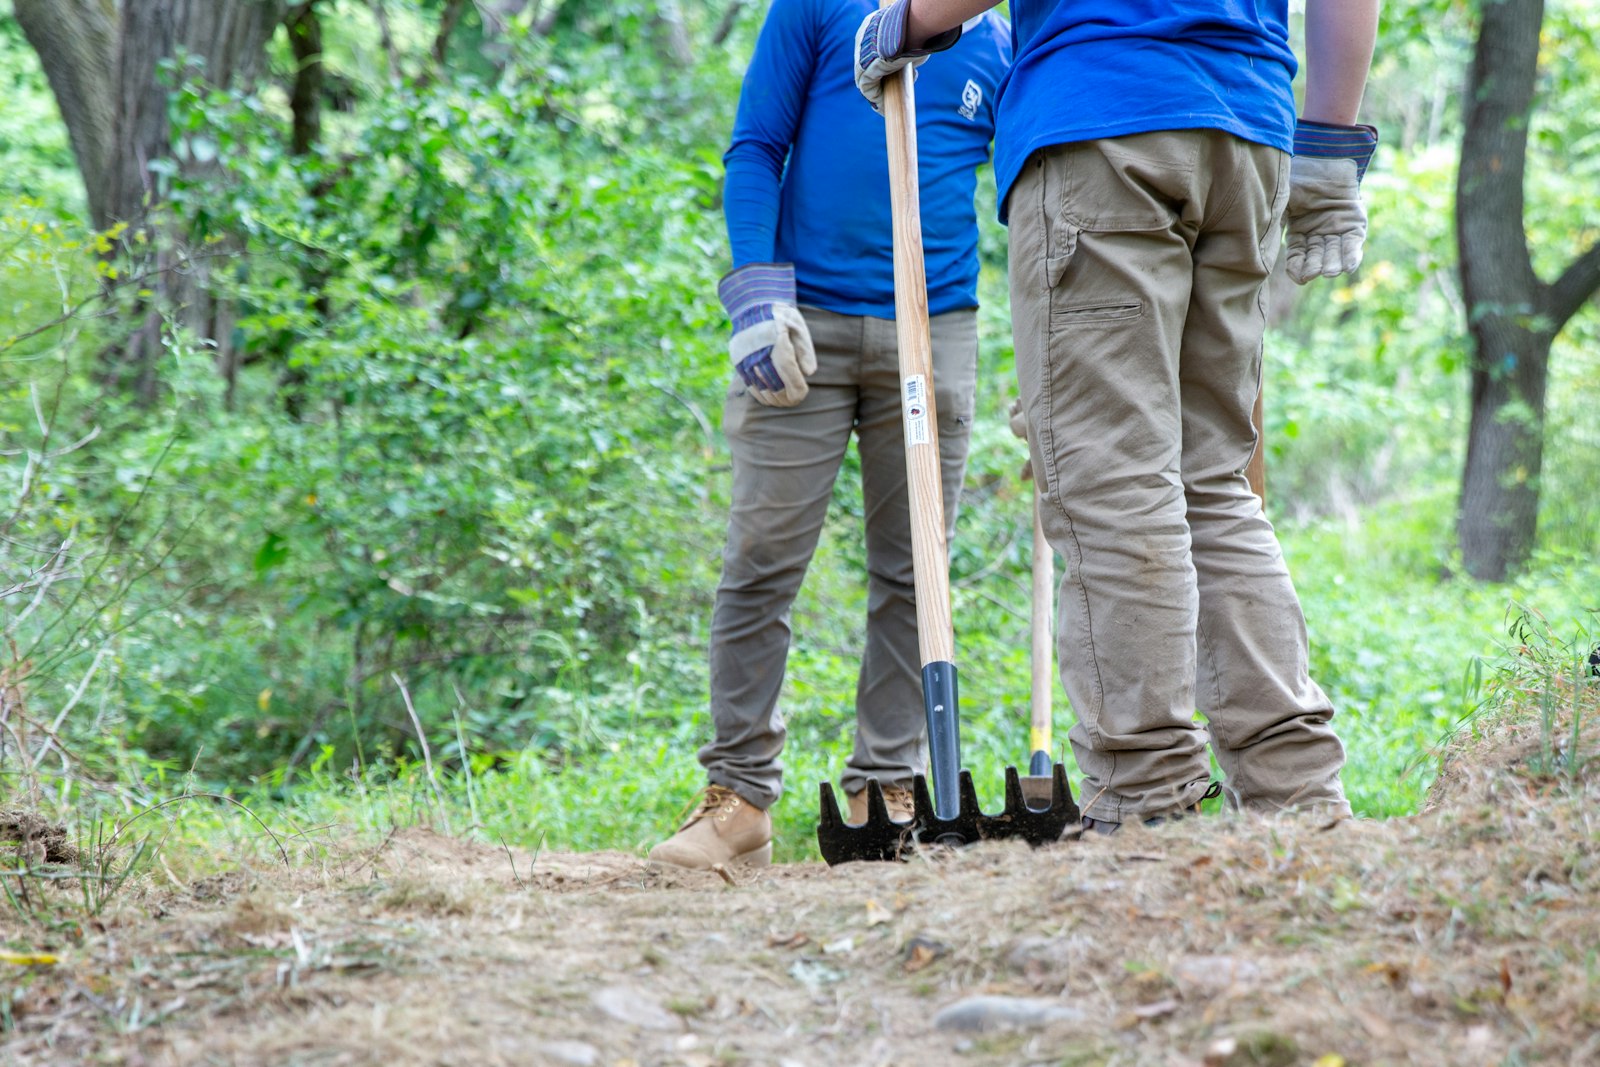 The torsos and legs of two people in matching blue shirts and khaki pants. One holds a rake